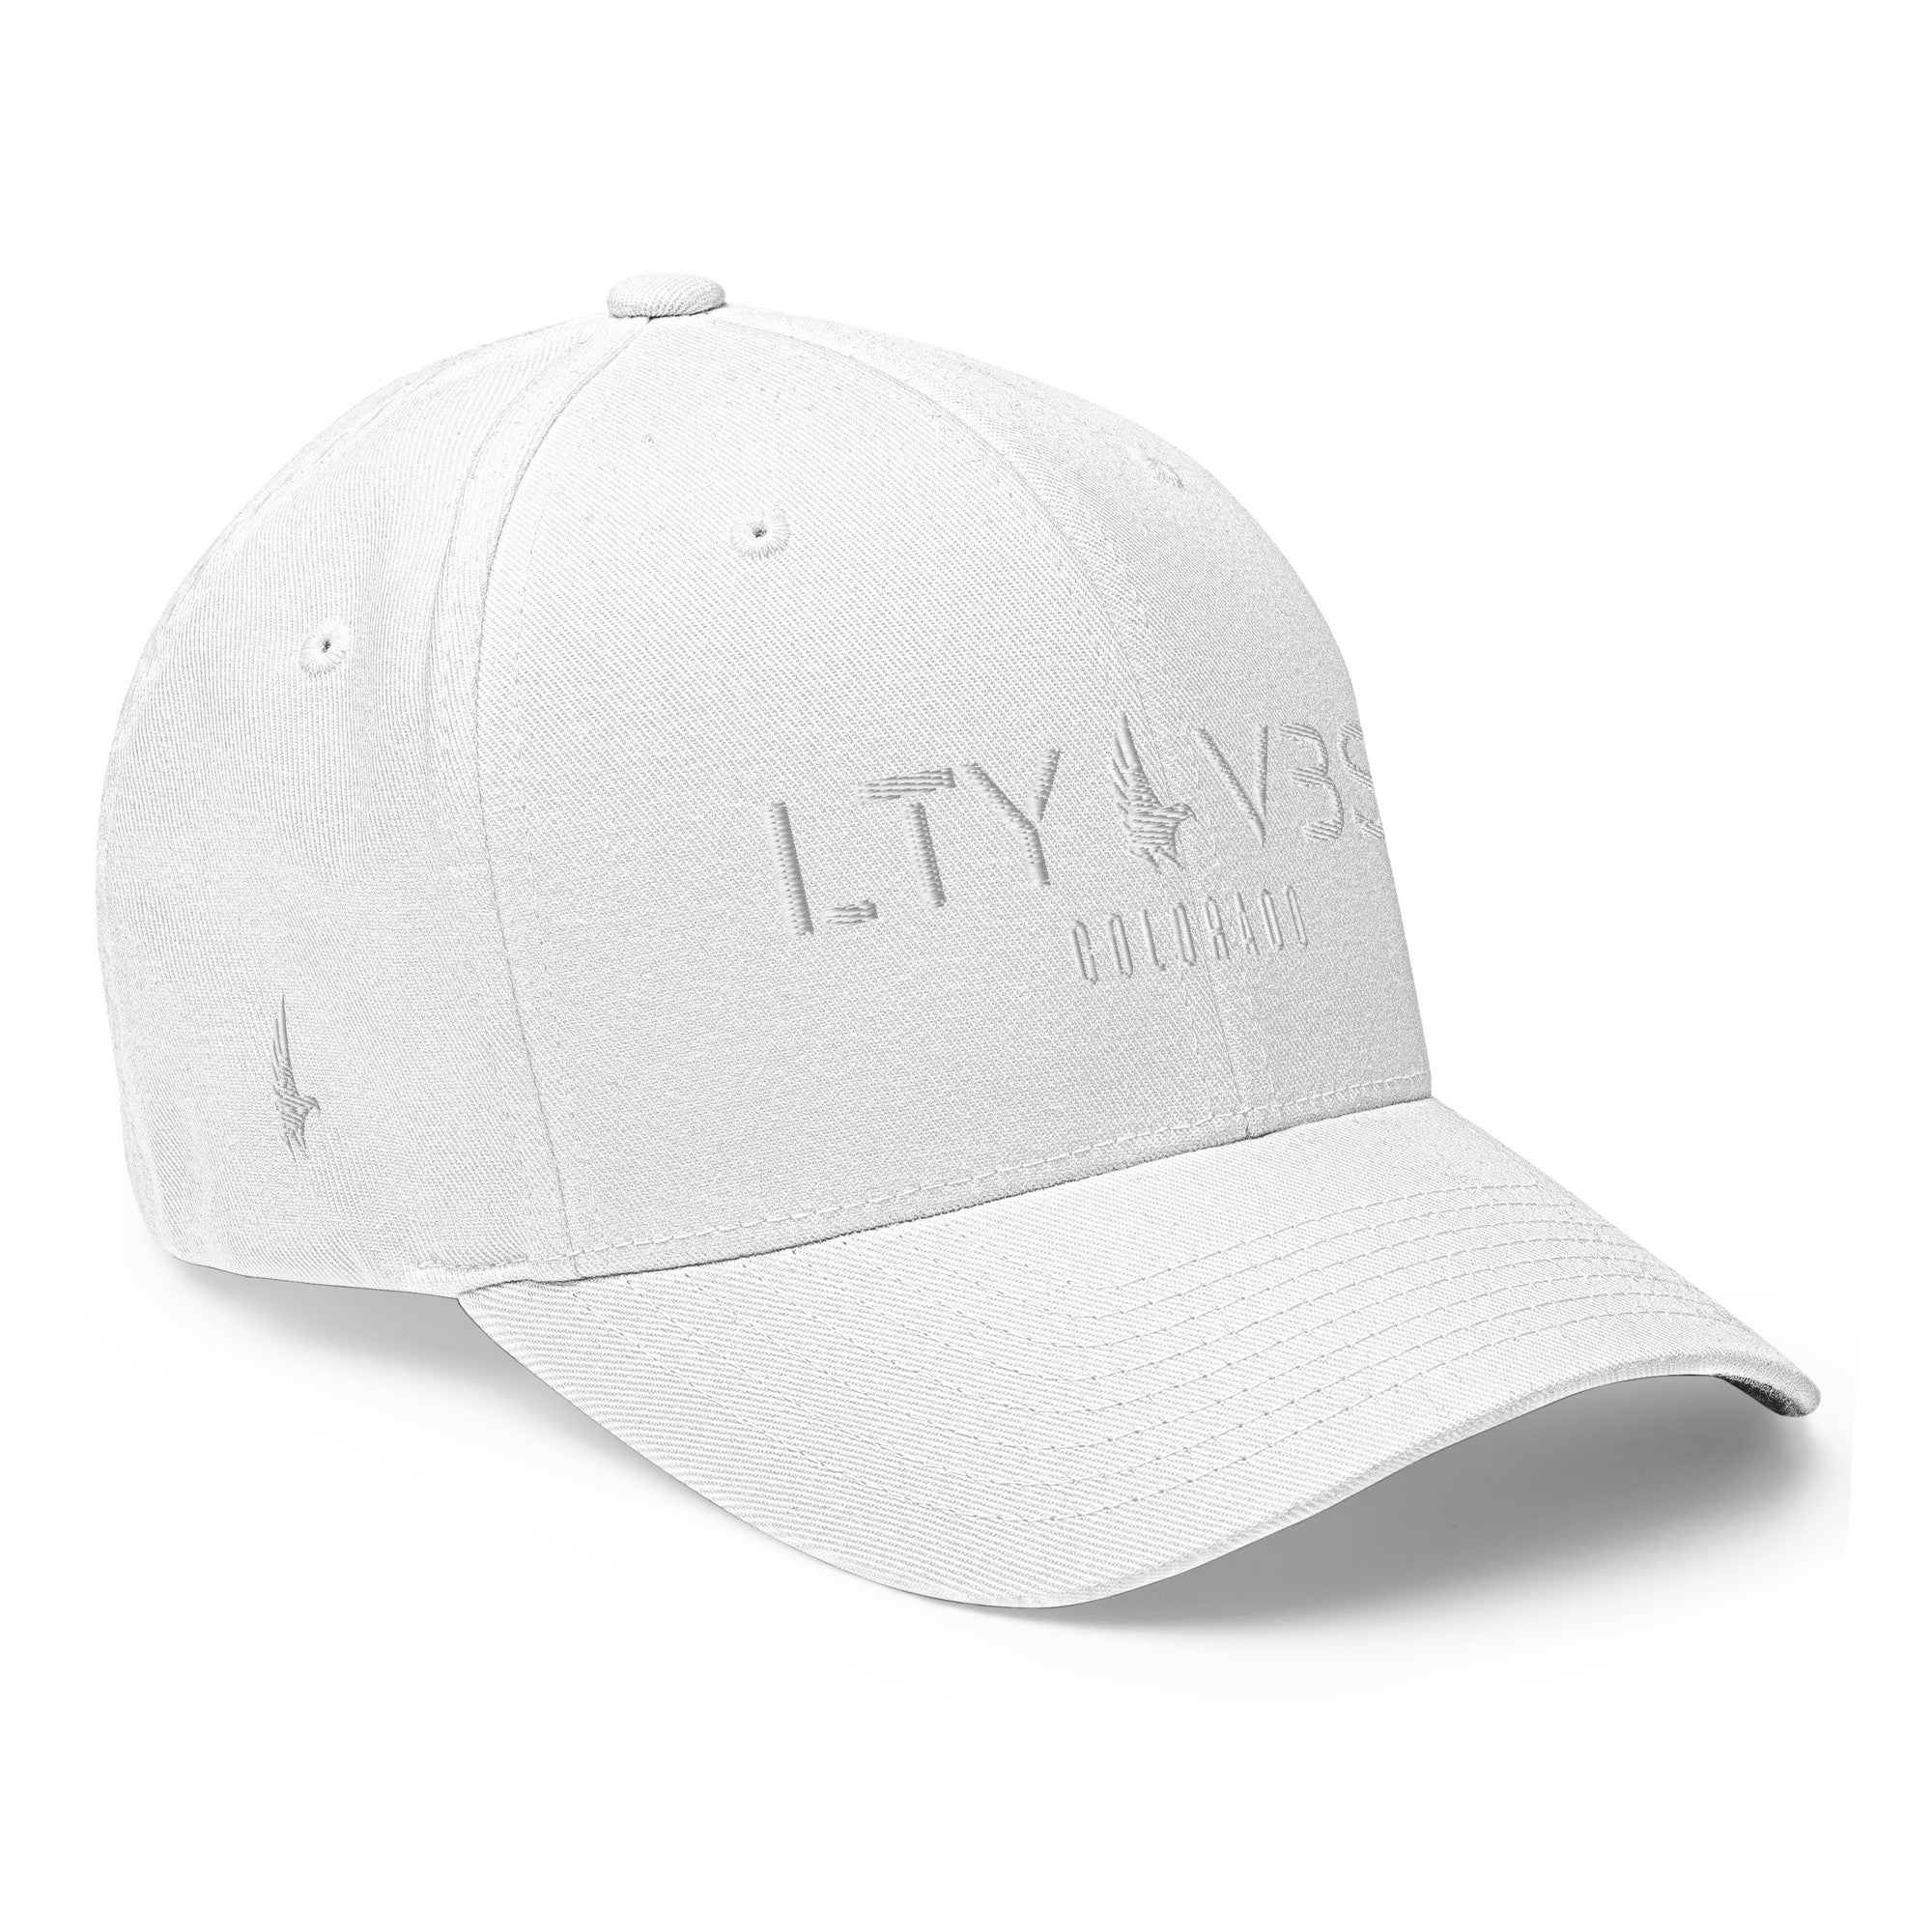 Loyalty Era Colorado Fitted Hat White / White Fitted - Loyalty Vibes